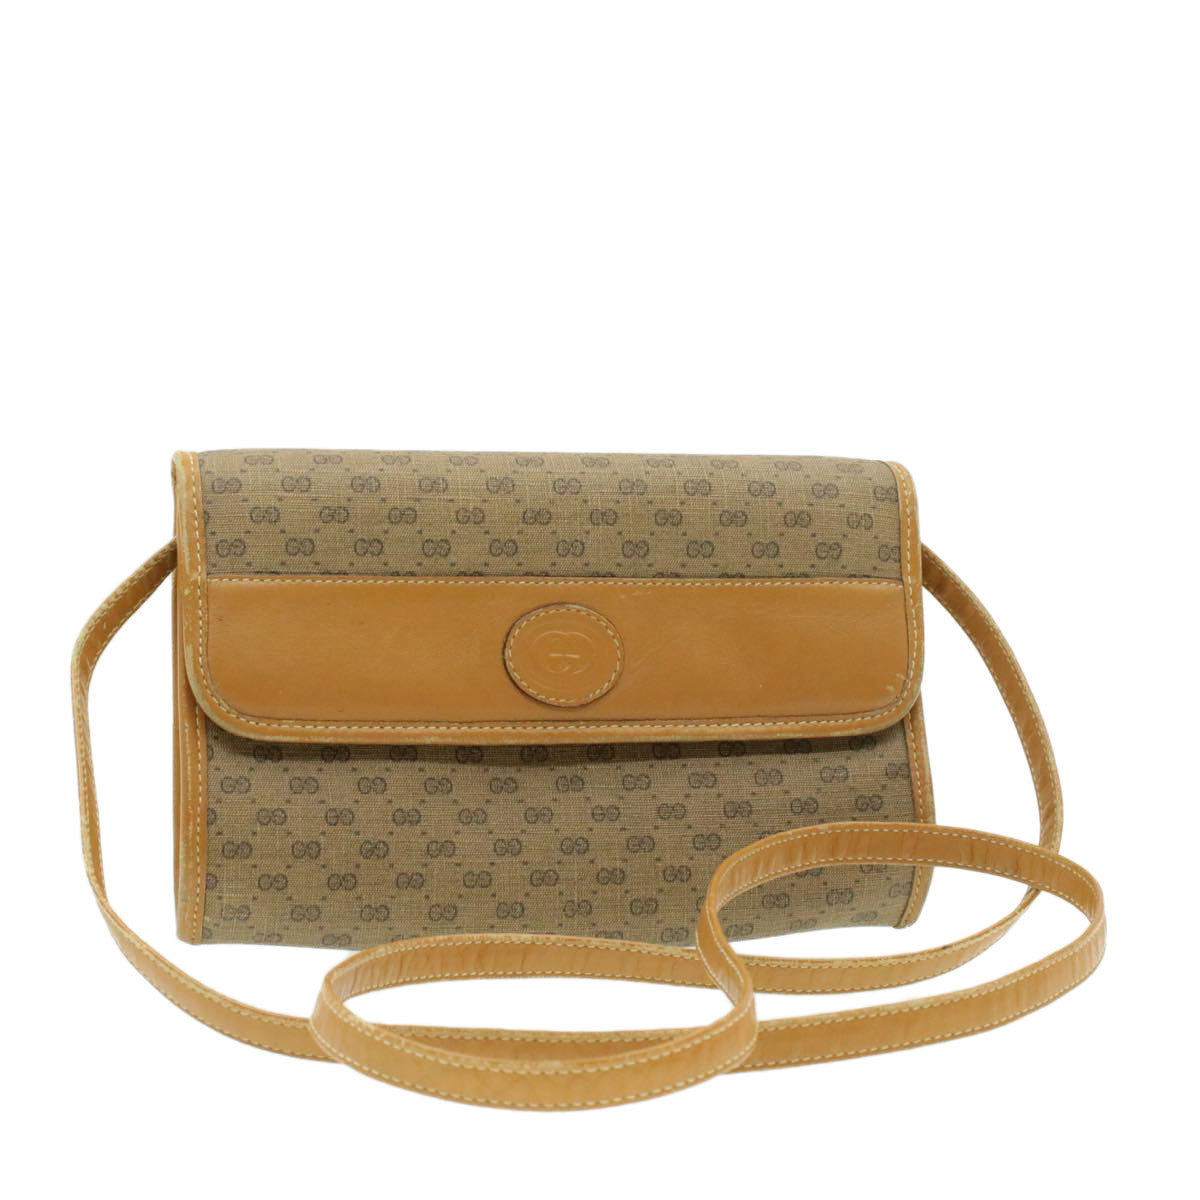 GUCCI Micro small PVC Leather Shoulder Bag Beige Auth am064g